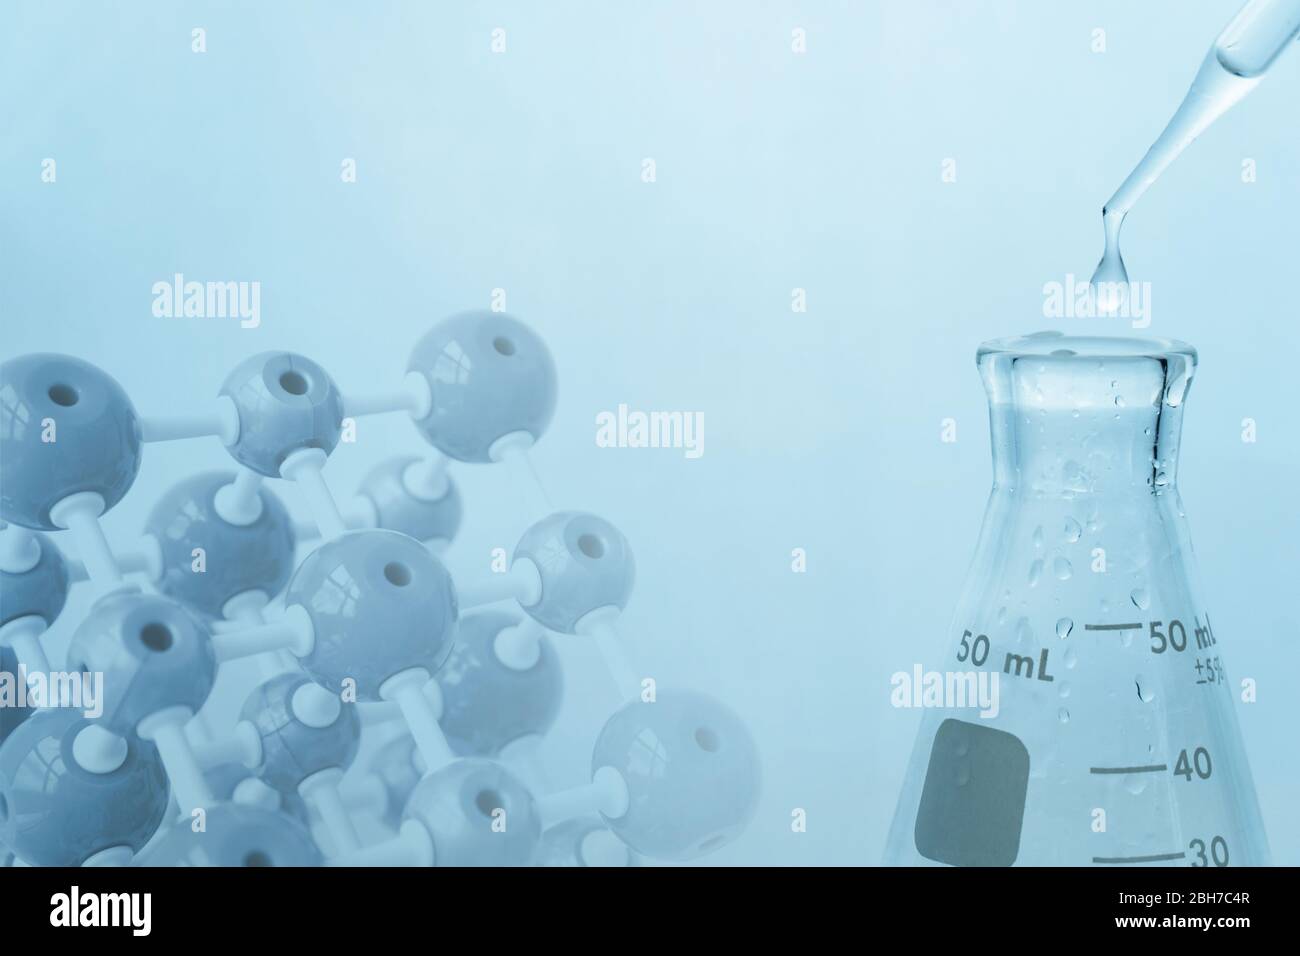 glass flask with water drop in blue medical sciene laboratory with molecular chemistry model background Stock Photo